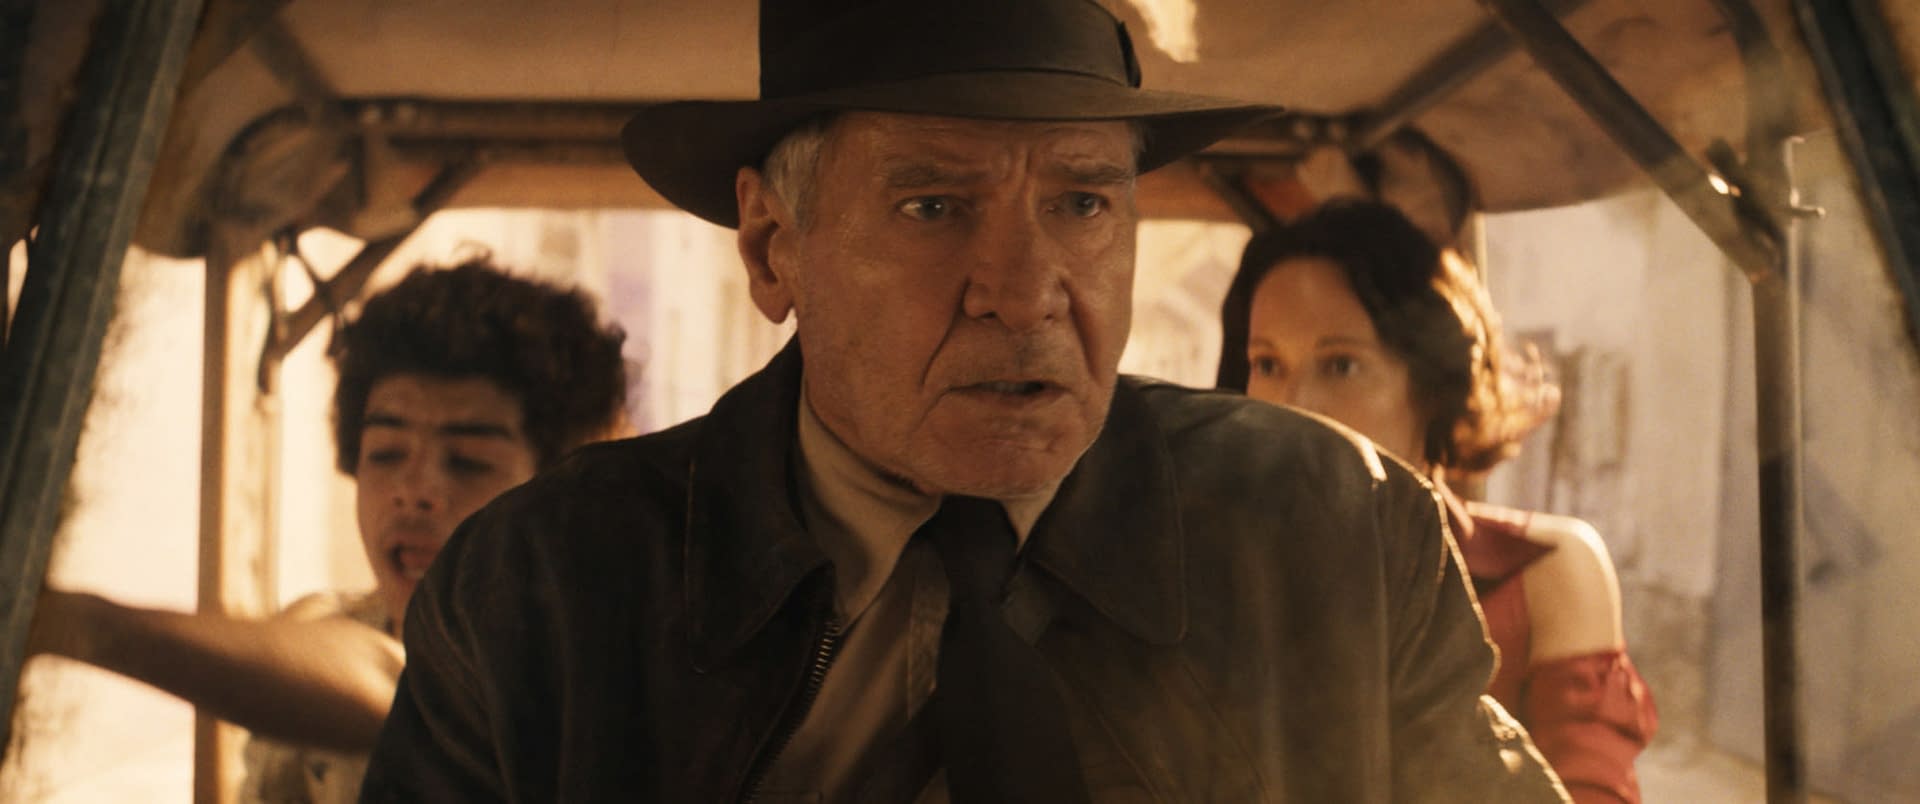 Indiana Jones And The Dial Of Destiny Trailer Shows Unresolved Journey